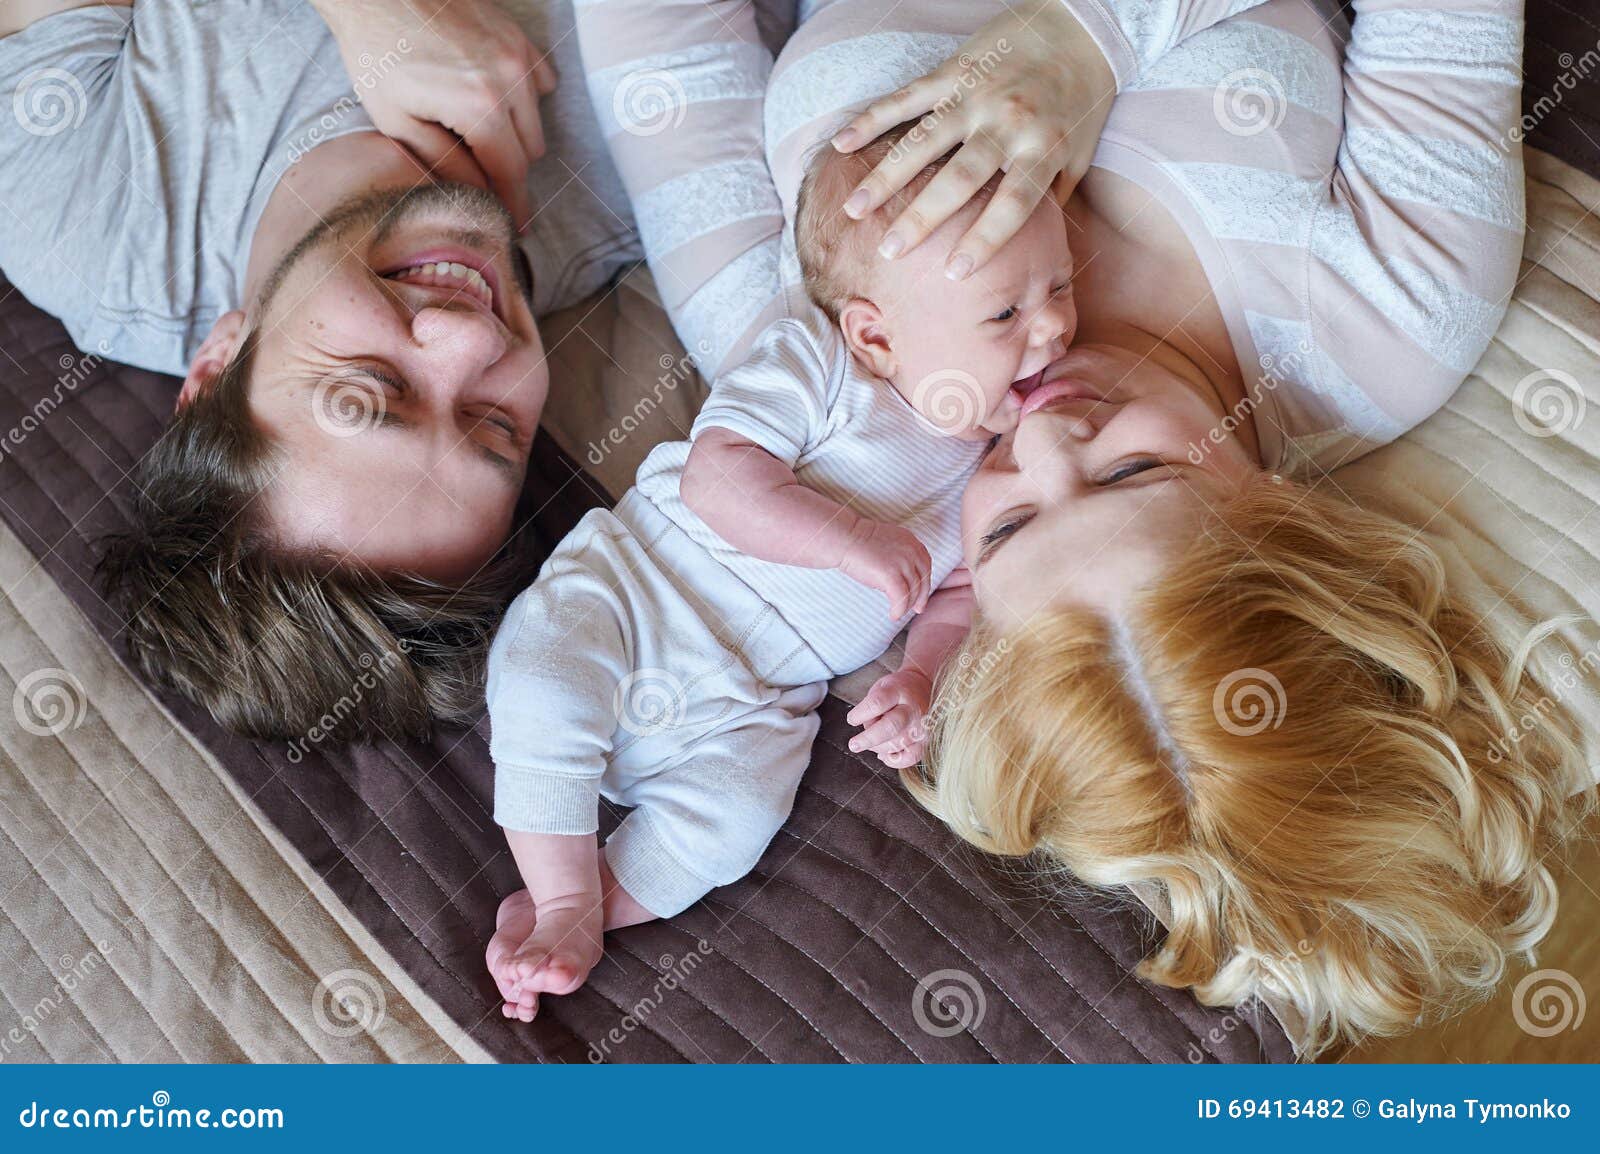 Mom and Dad Playing with His Baby Son on the Bed. Happy Family ...